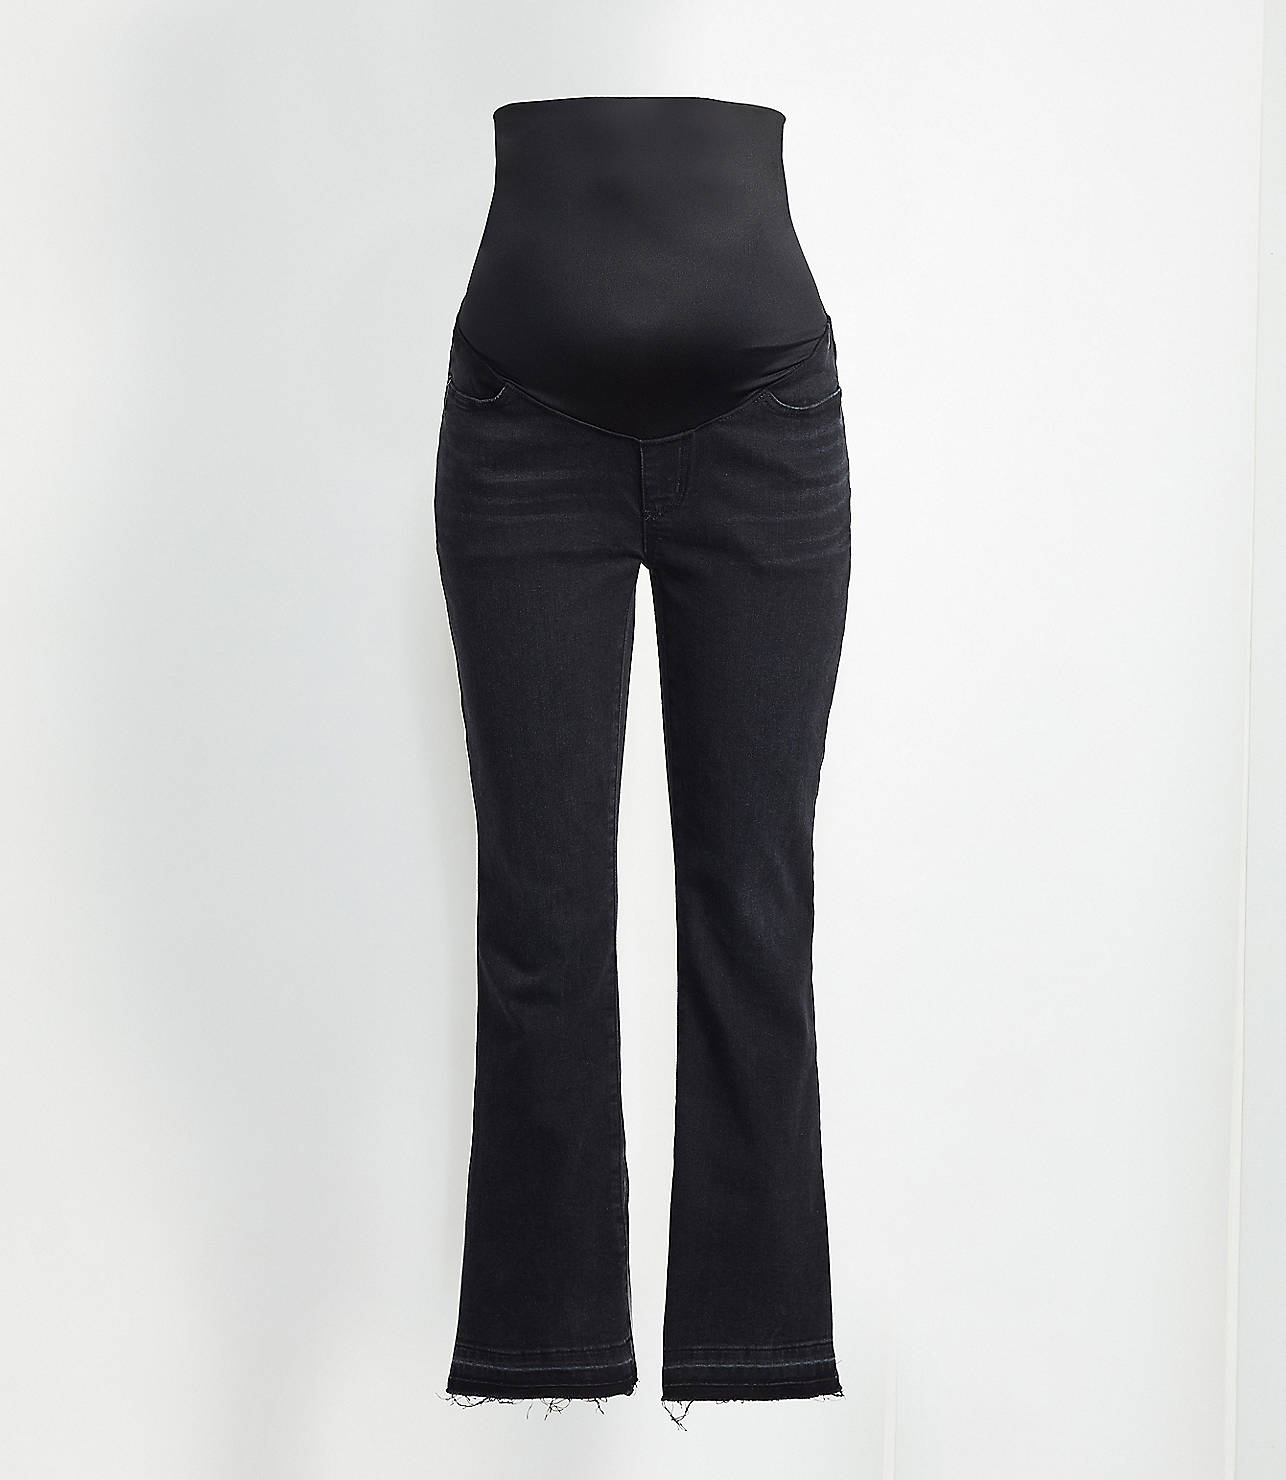 Petite Maternity Flare Crop Jeans in Washed Black Wash